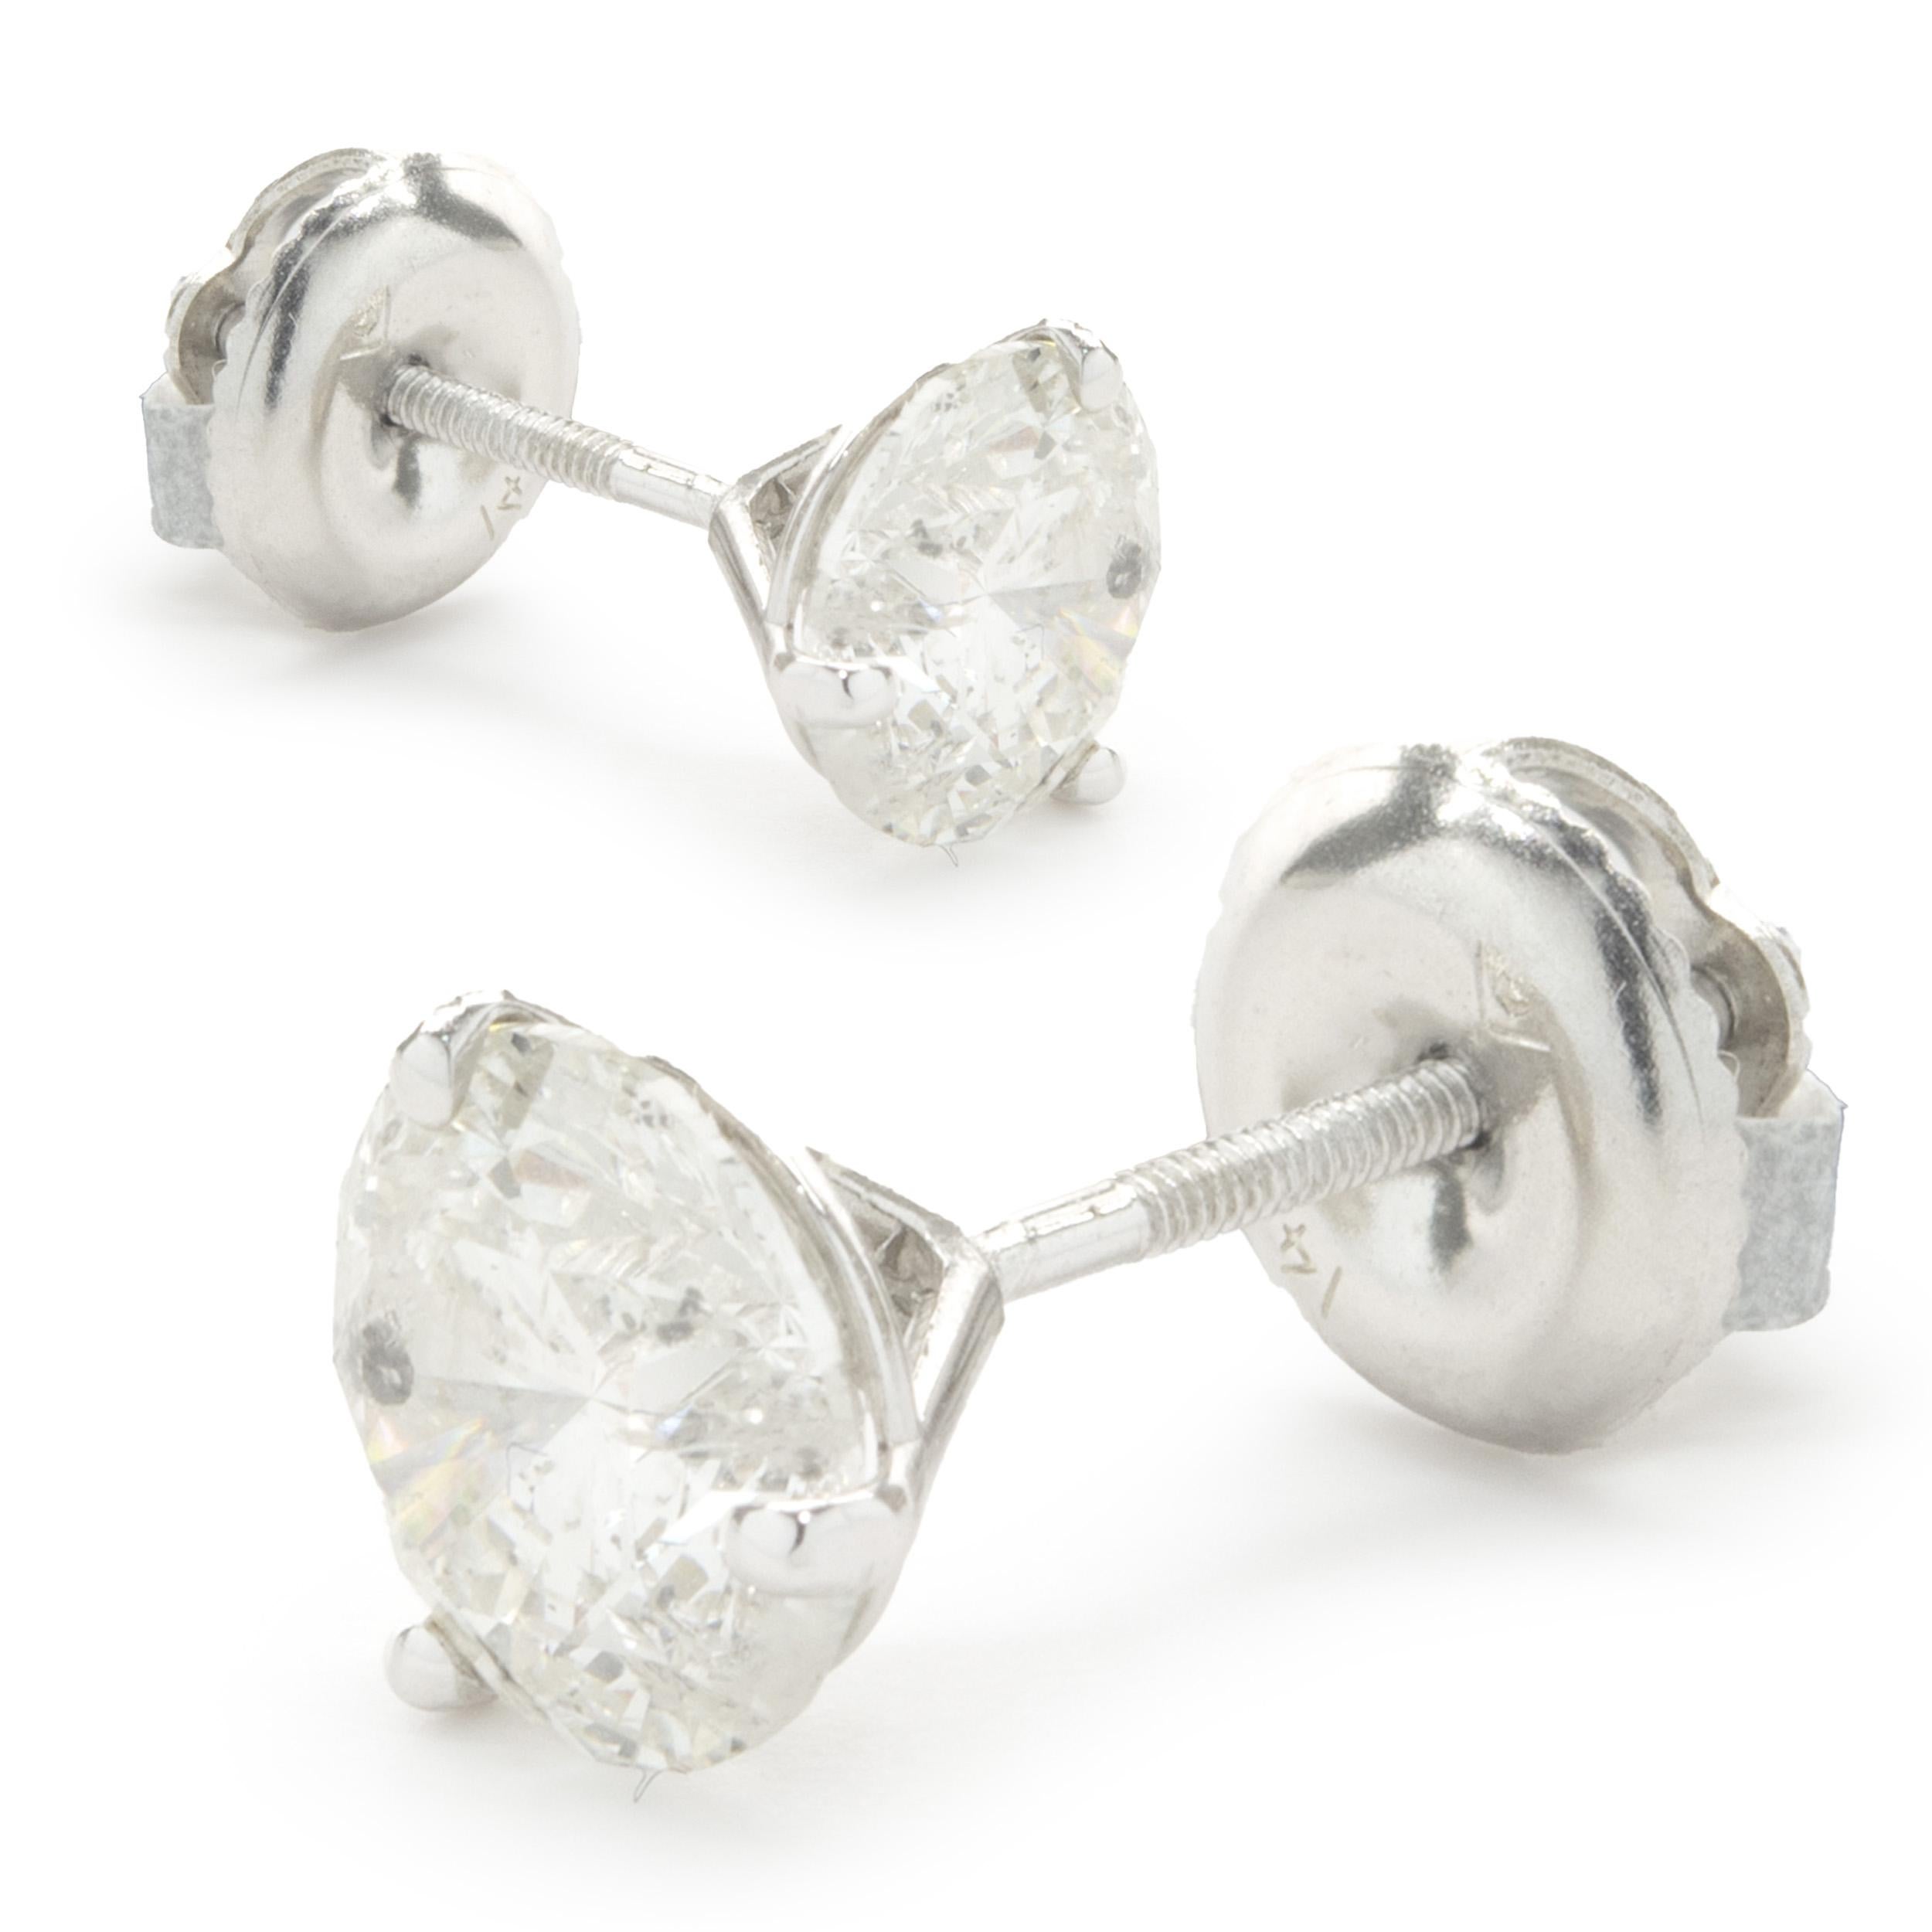 Material: 14k white gold
Diamonds: 2 round brilliant cut = 2.09cttw
Color: G / H
Clarity: I1
Dimensions: earrings measure approximately 6.76mm in diameter
Fastenings: post with screw backs
Weight: 1.15 grams